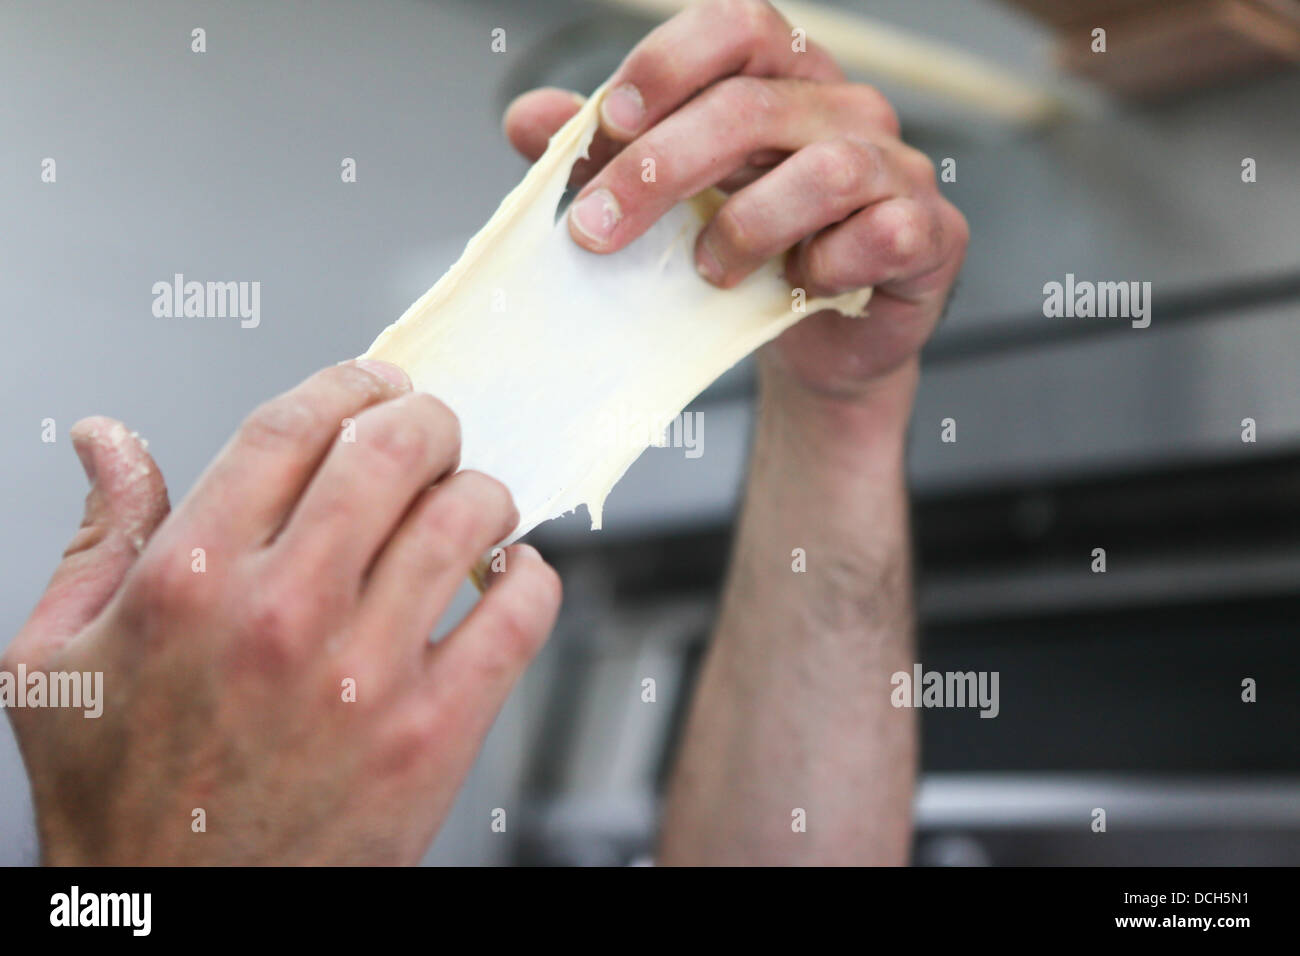 Baking Concept - hands of baker as he inspects the dough Stock Photo